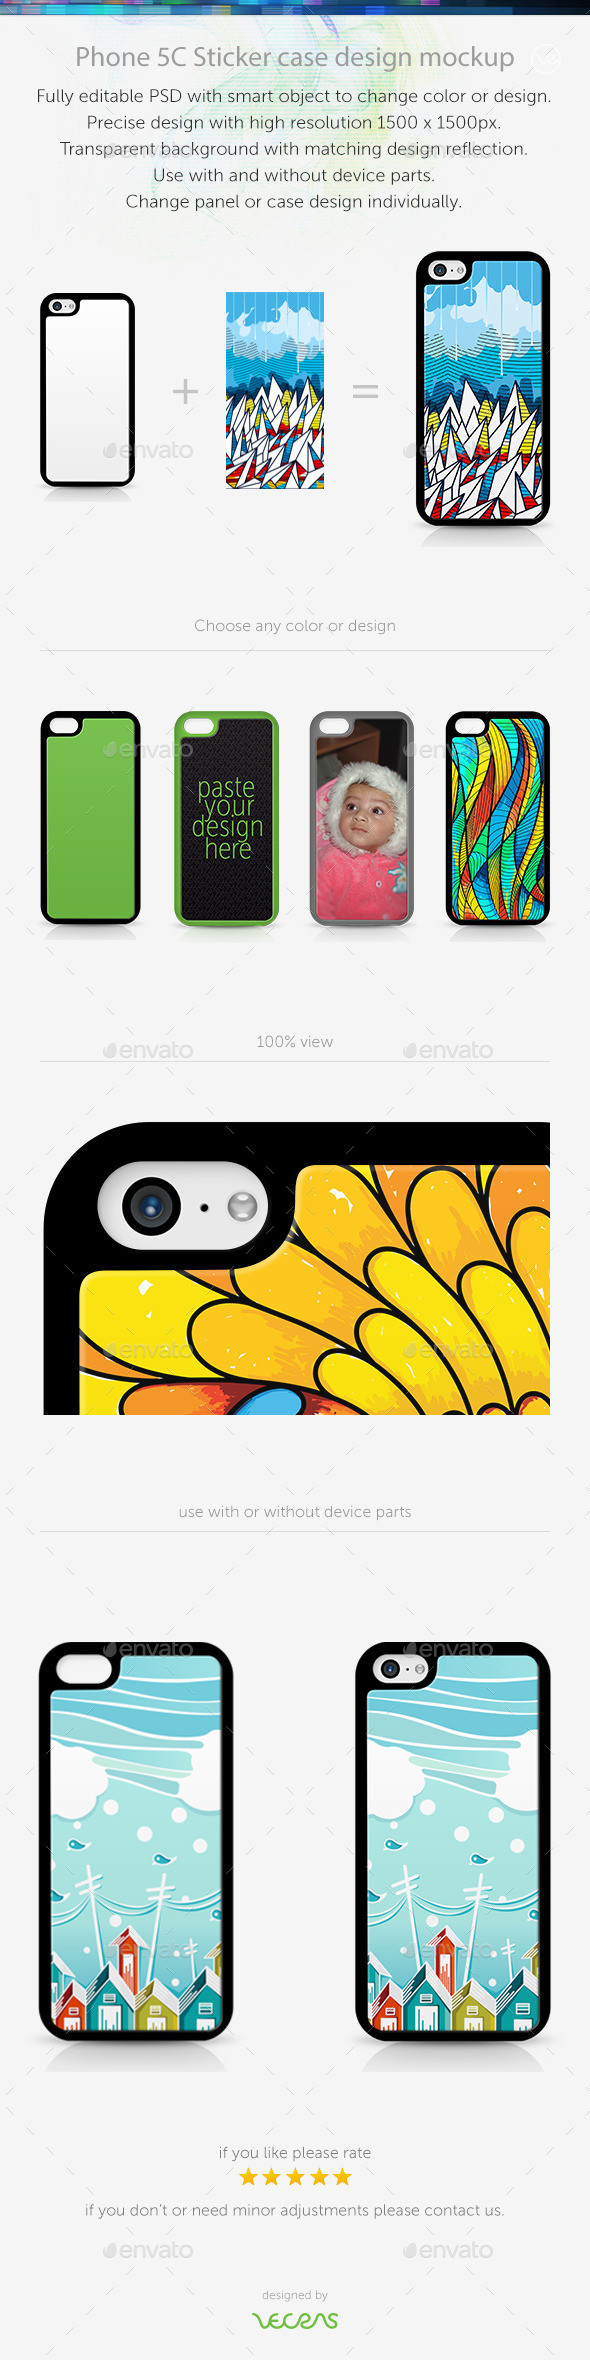 Preview phone 5c stickercas back